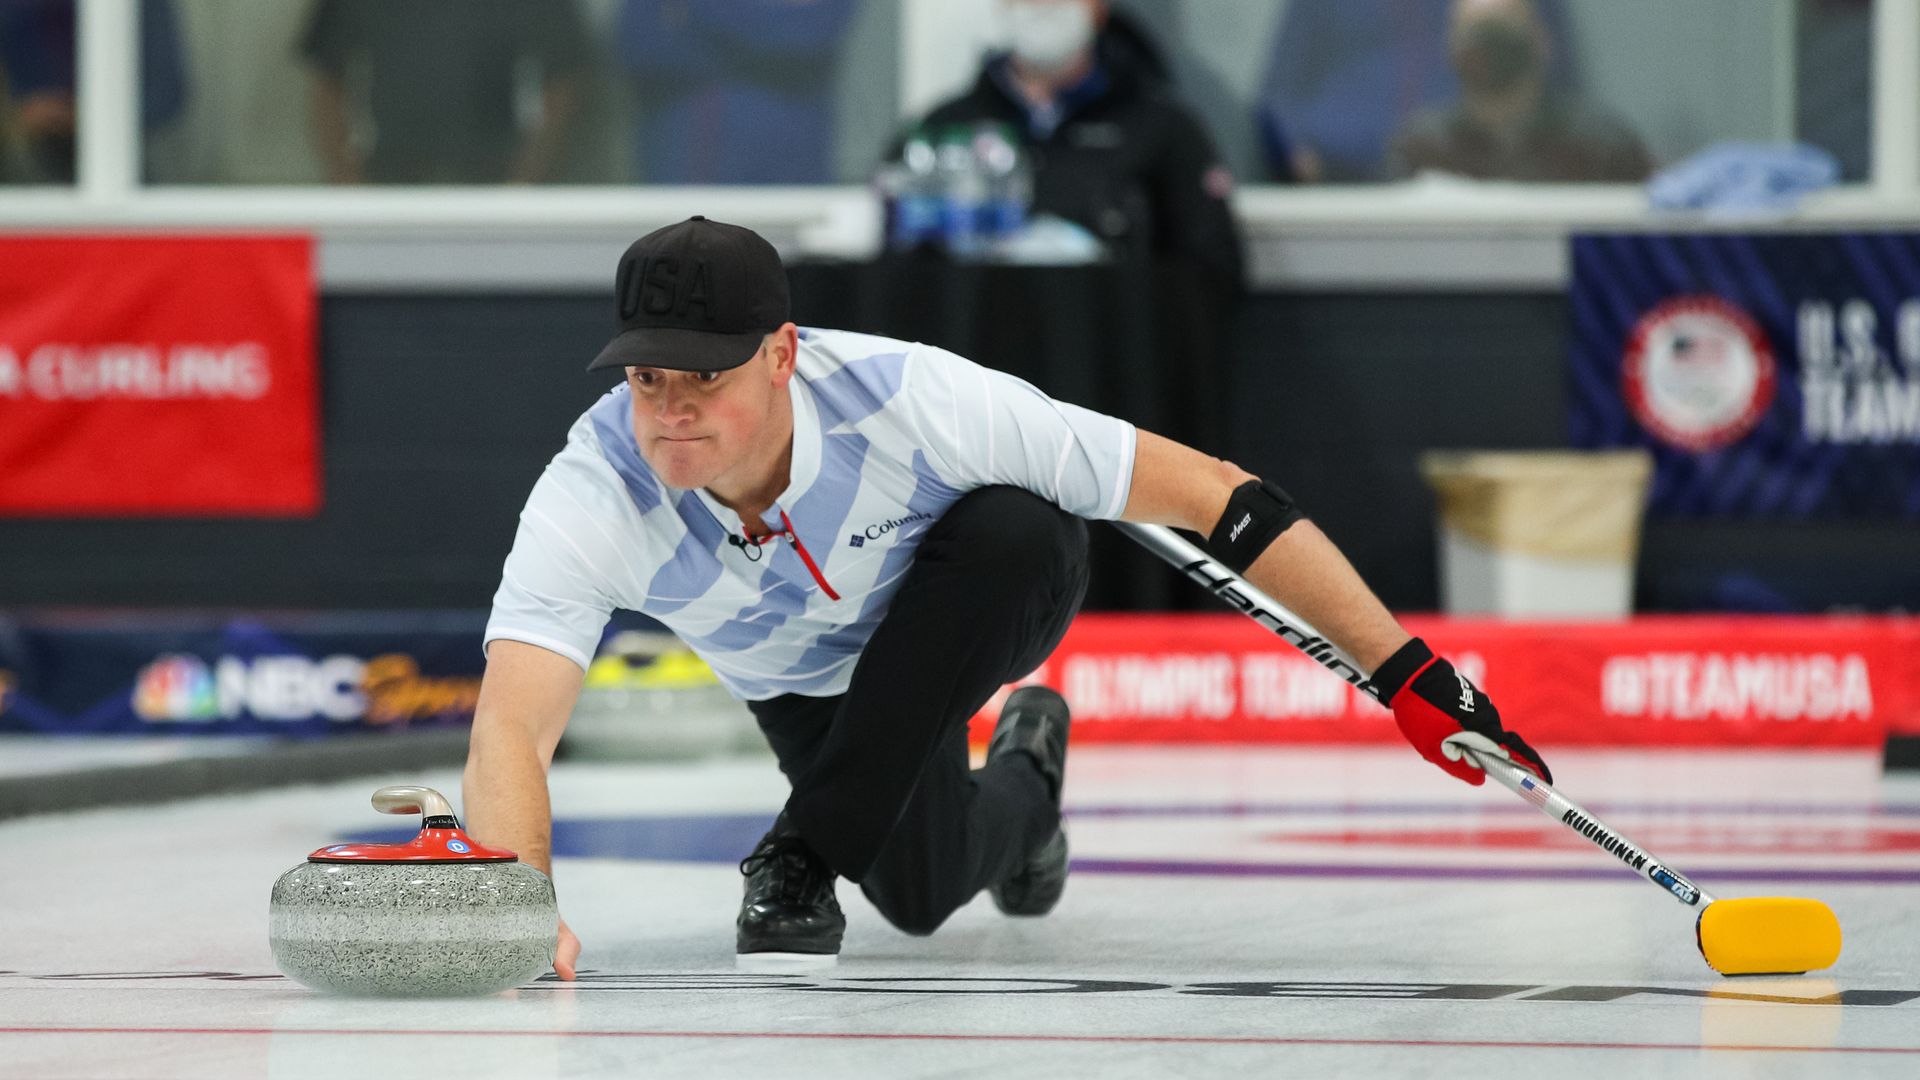 A man slides a curling stone across ice.